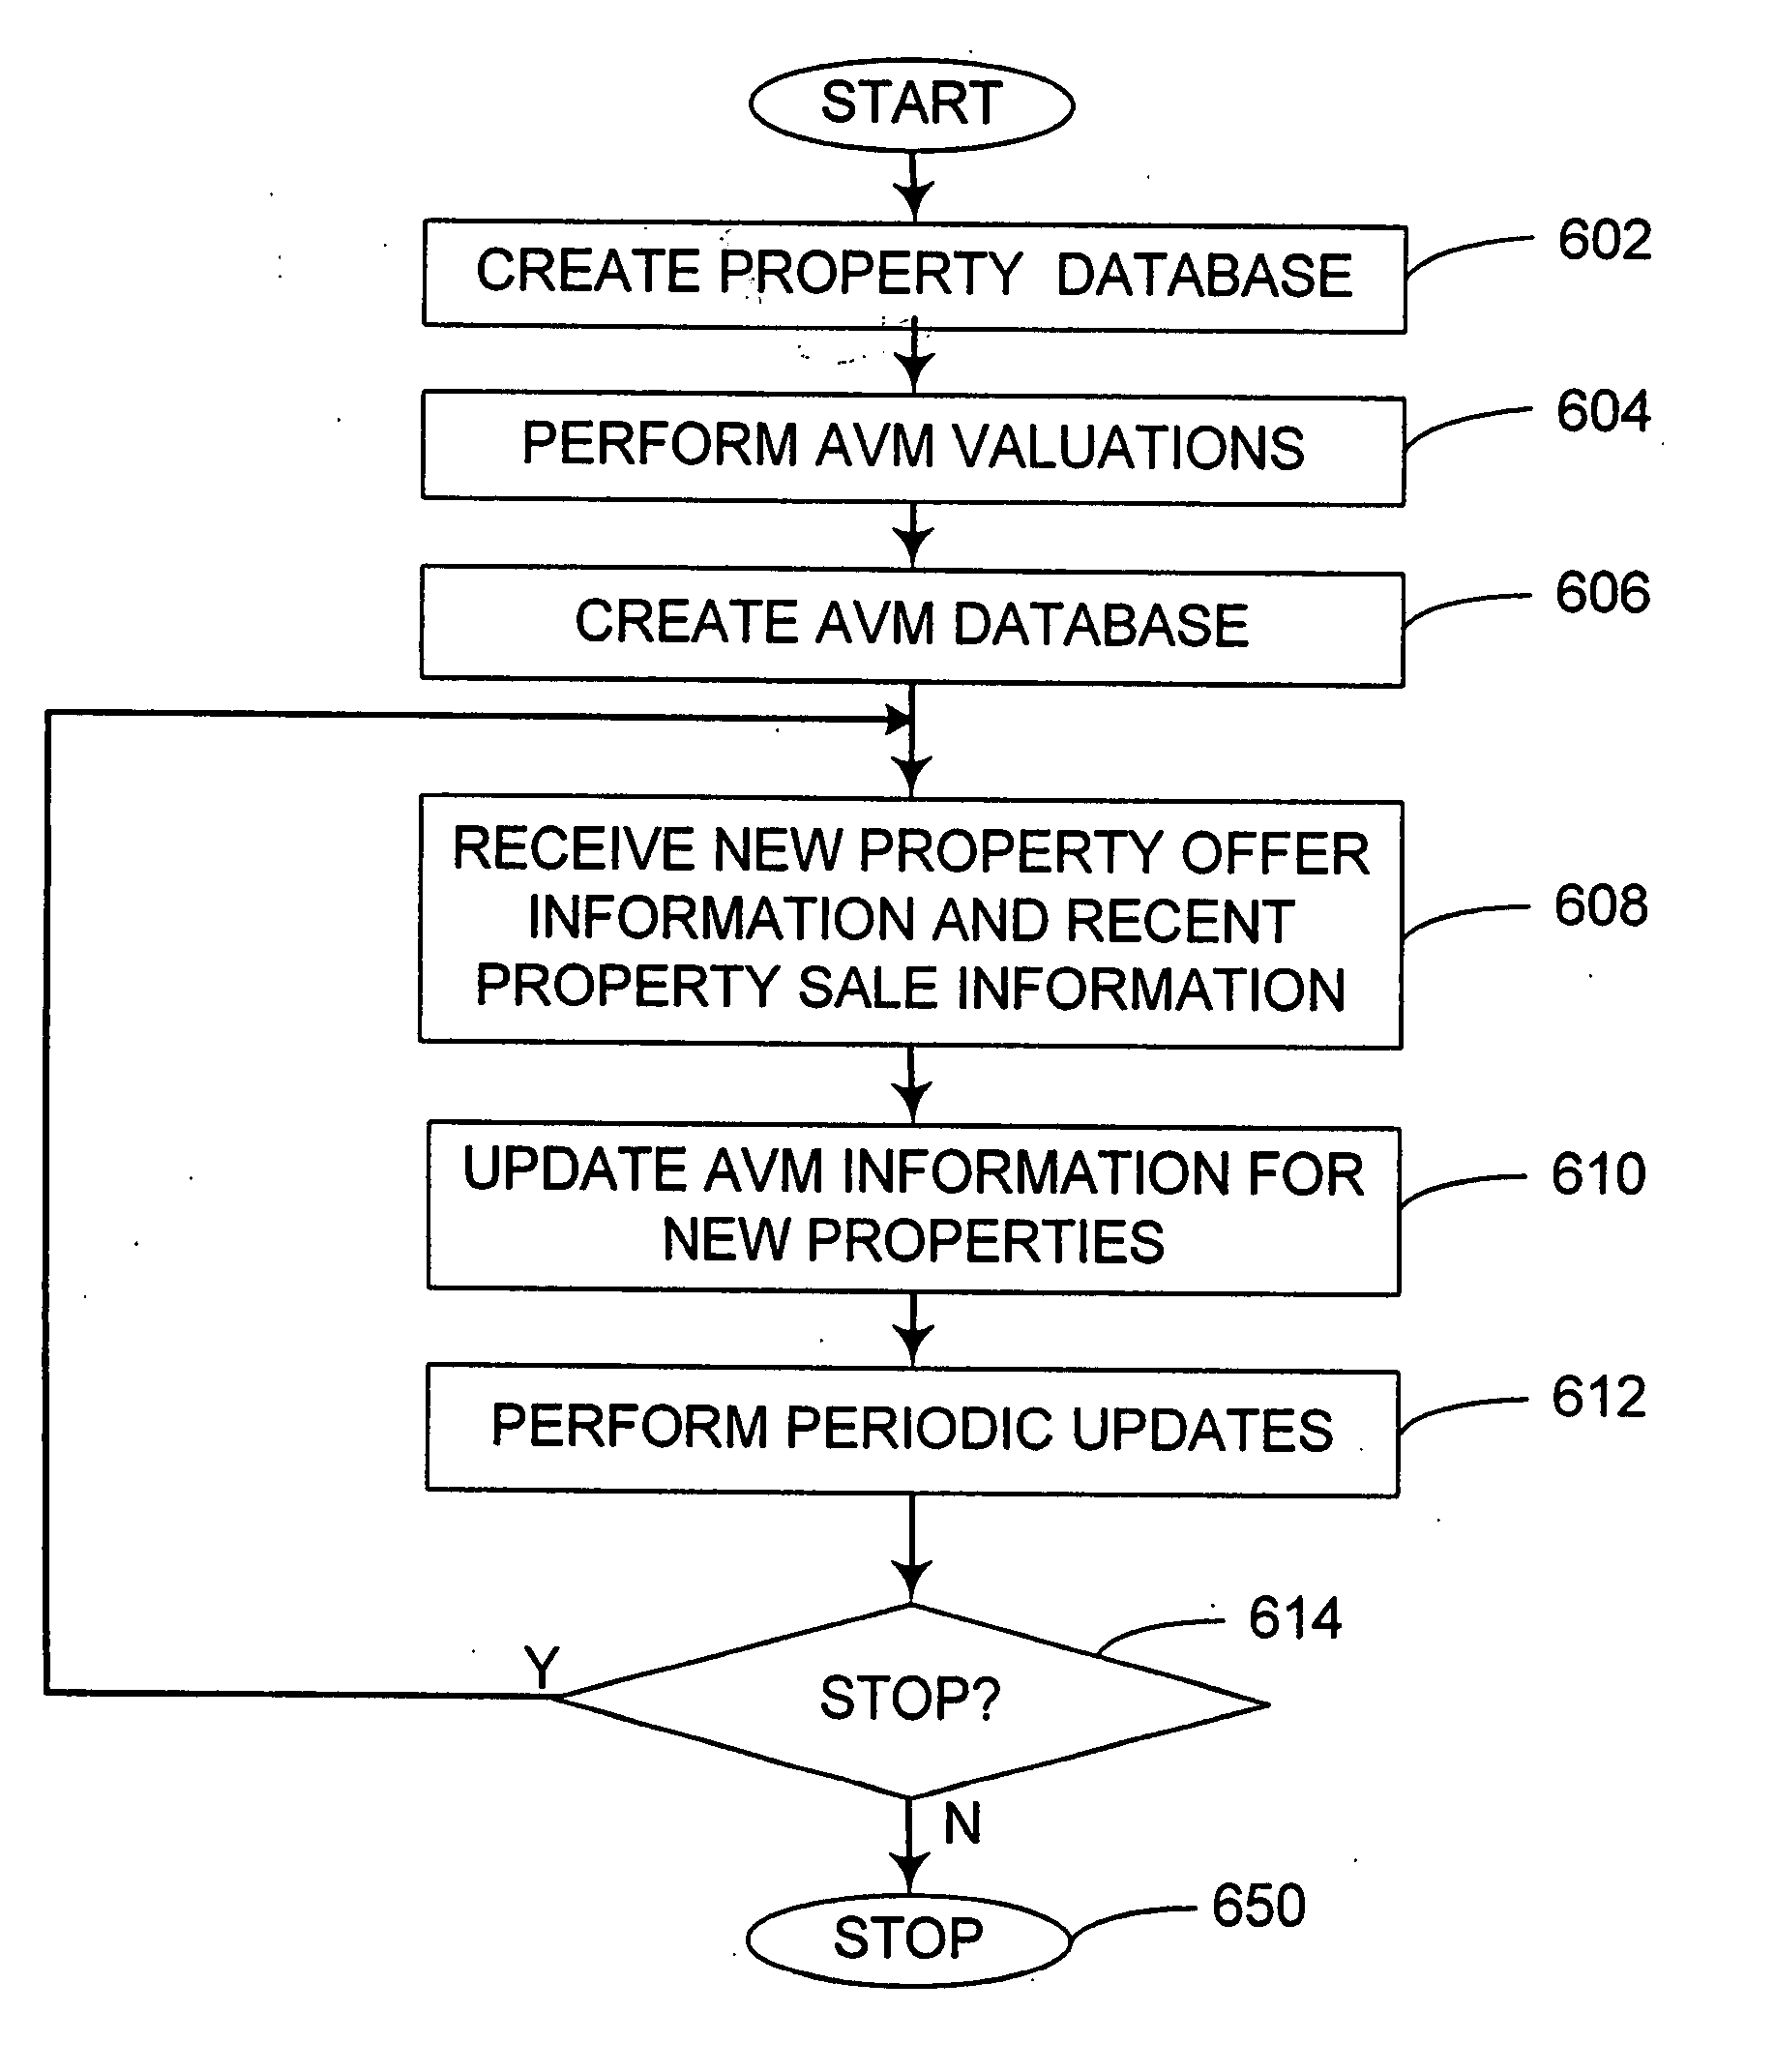 Computerized systems for formation and update of databases